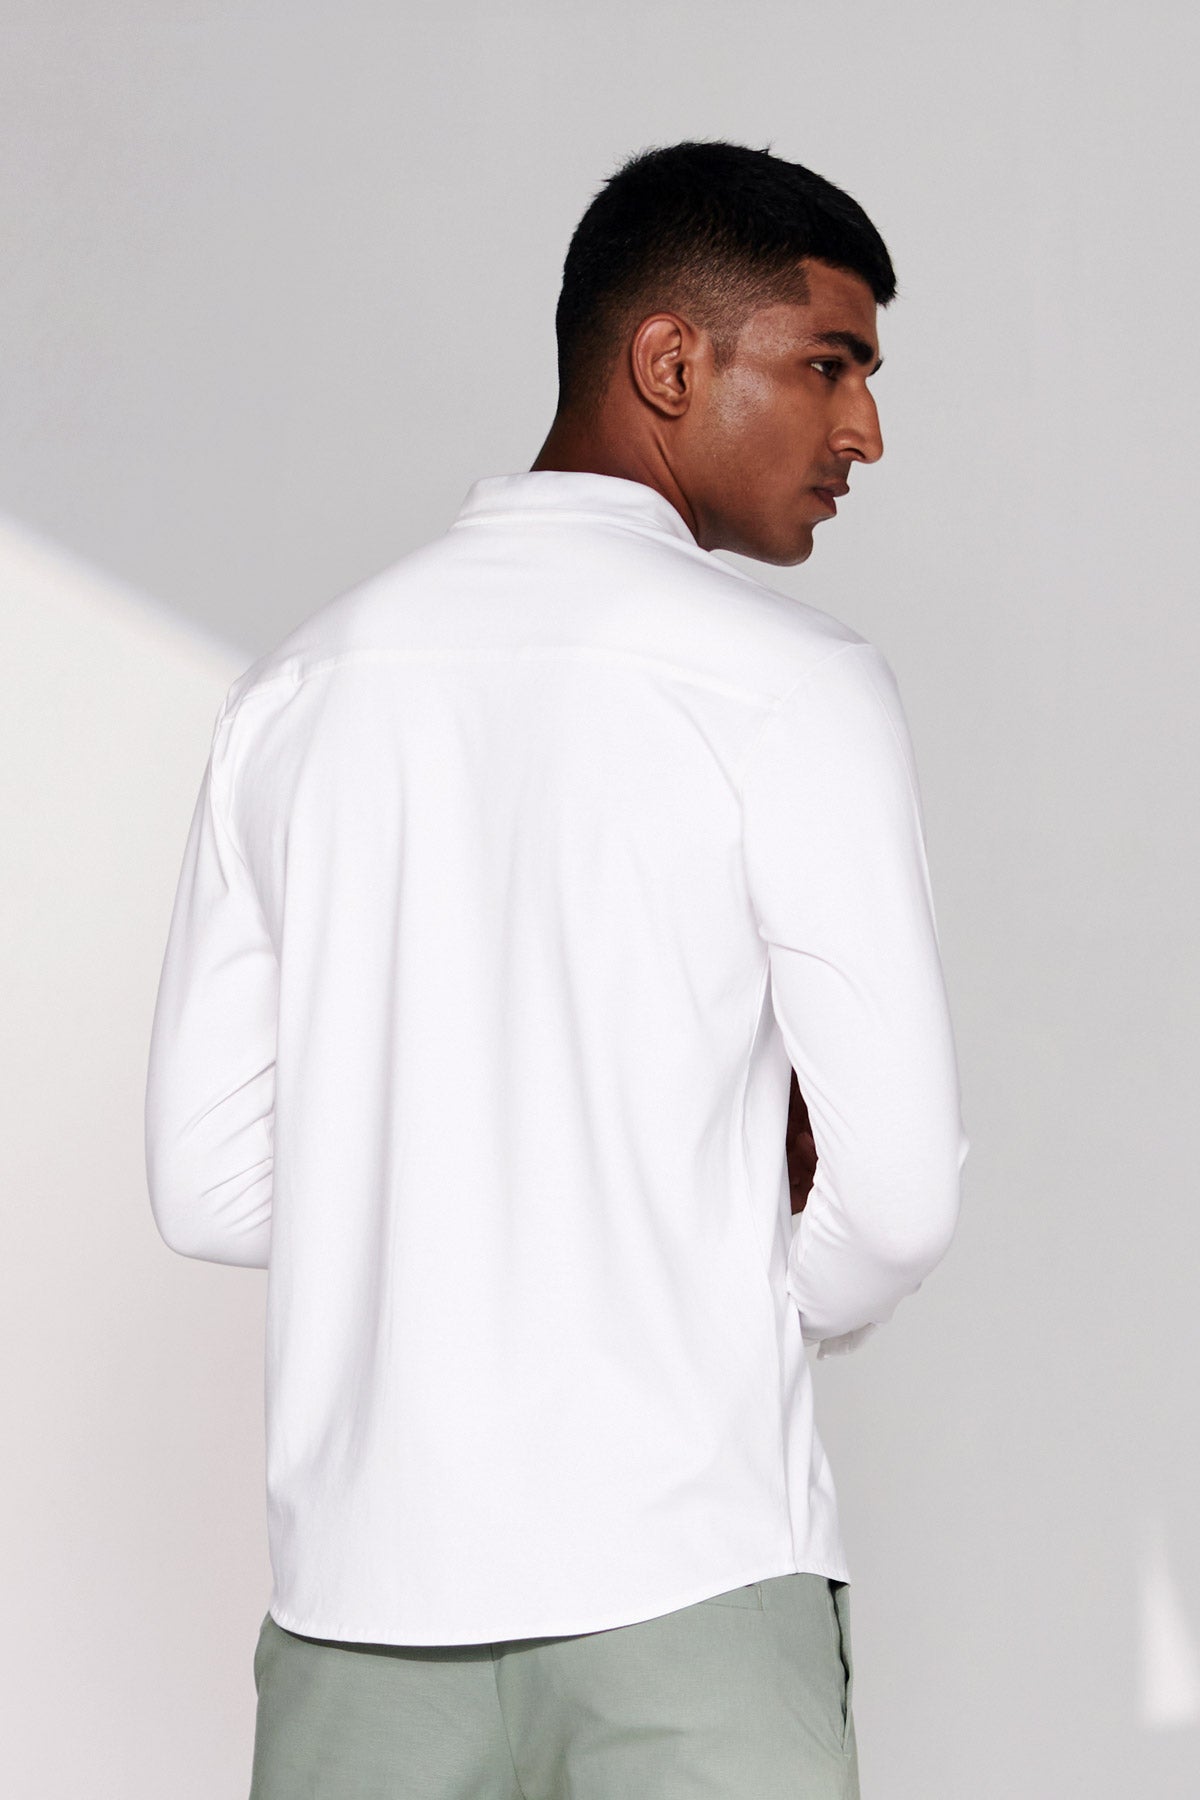 The Pure White Full Sleeve Shirt Beyours Essentials Private Limited